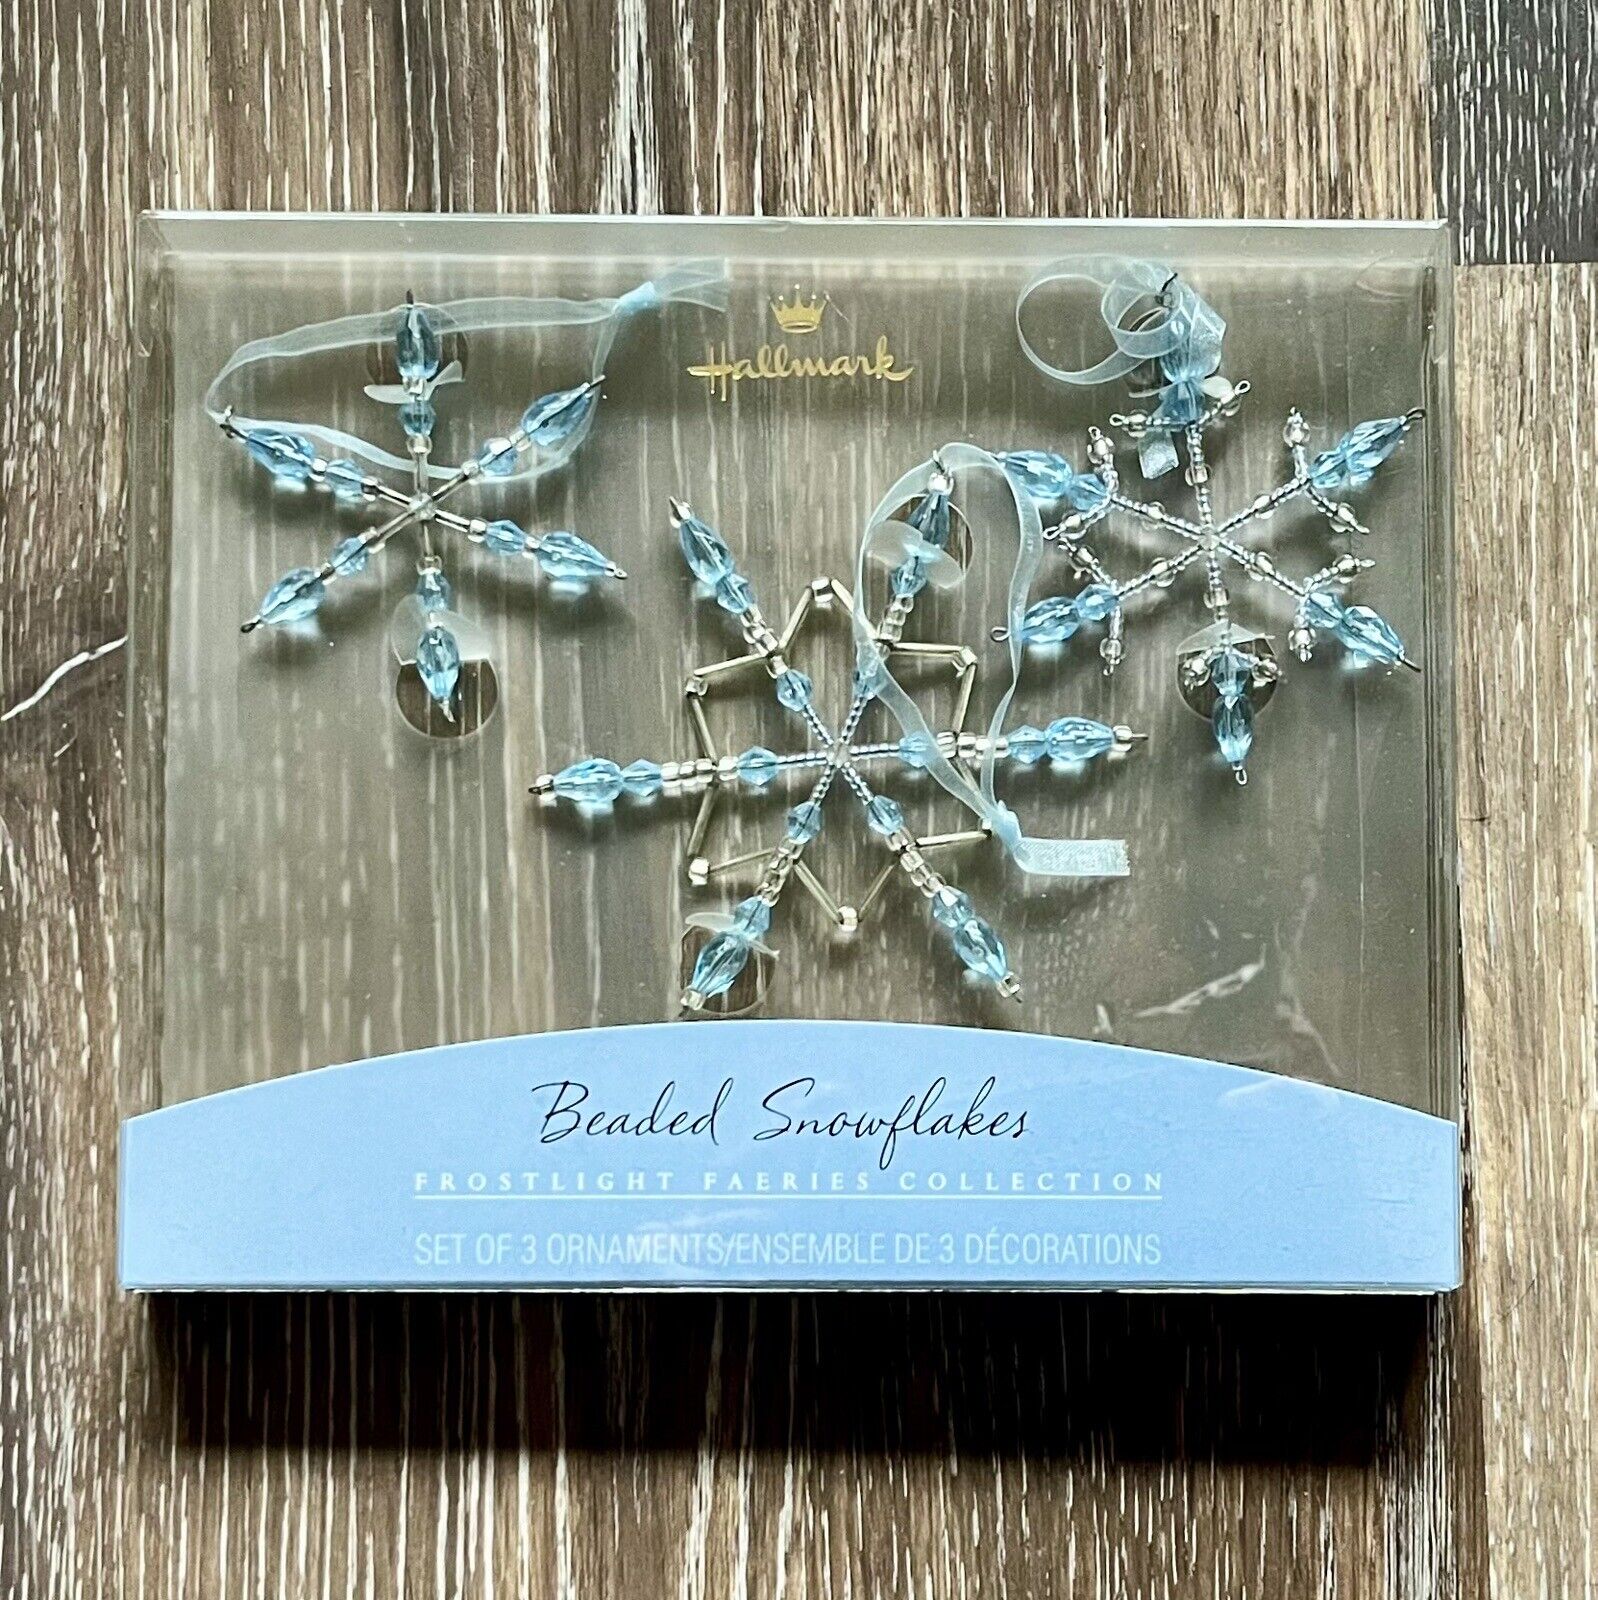 Hallmark Beaded Snowflakes Blue Frostlight Faeries Collection Ornaments 2001